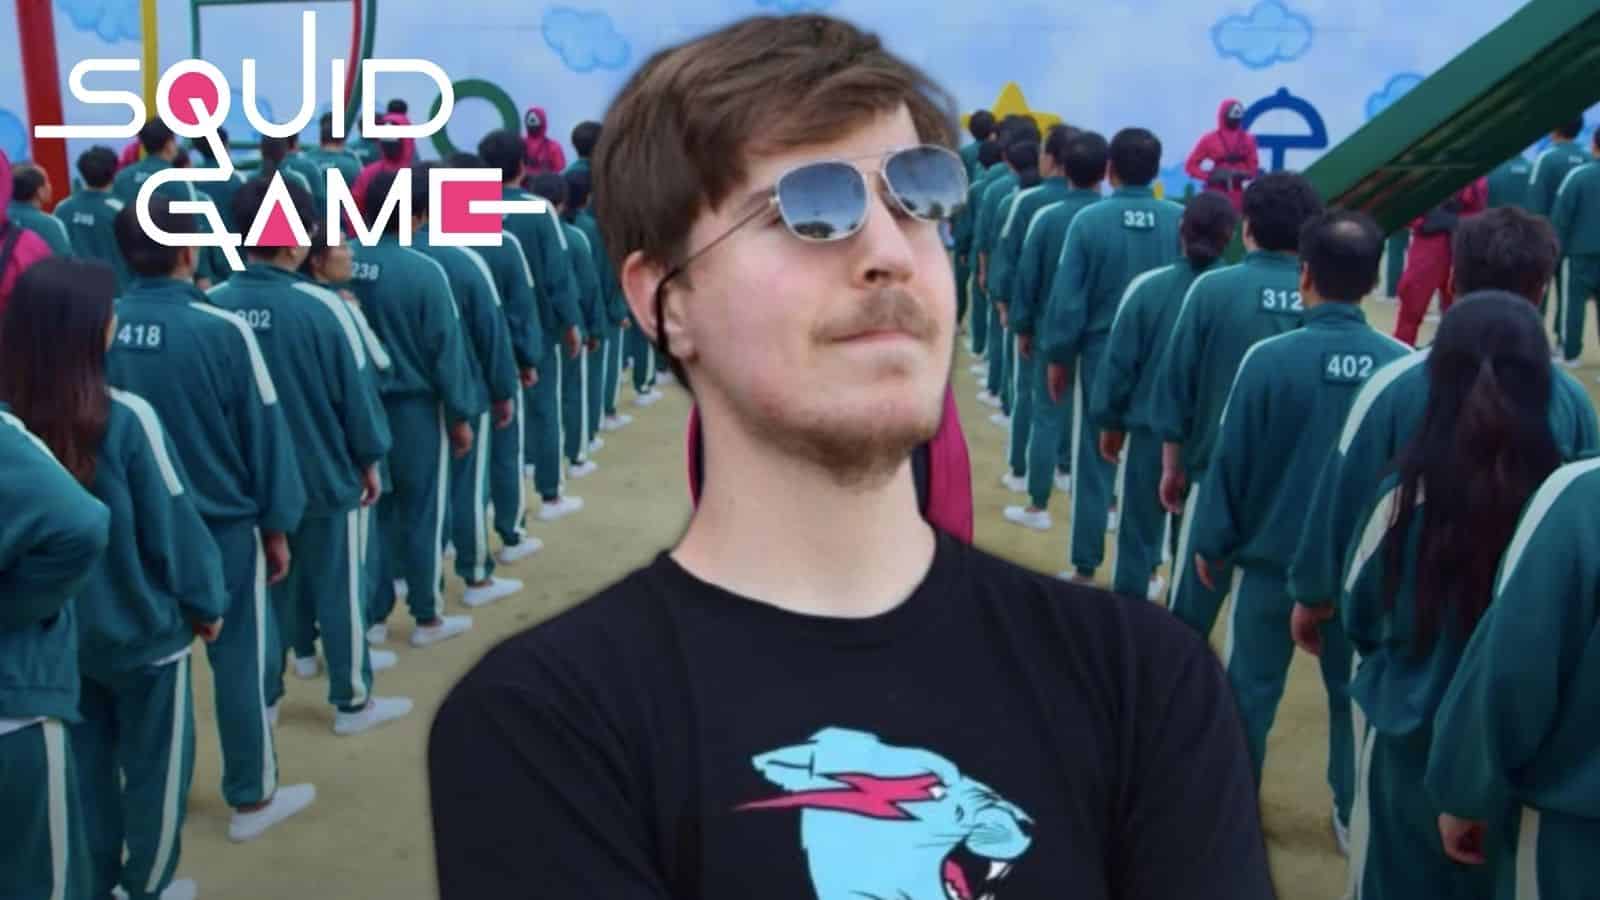 Squid Game Creator Earned Little From Show Despite Grossing